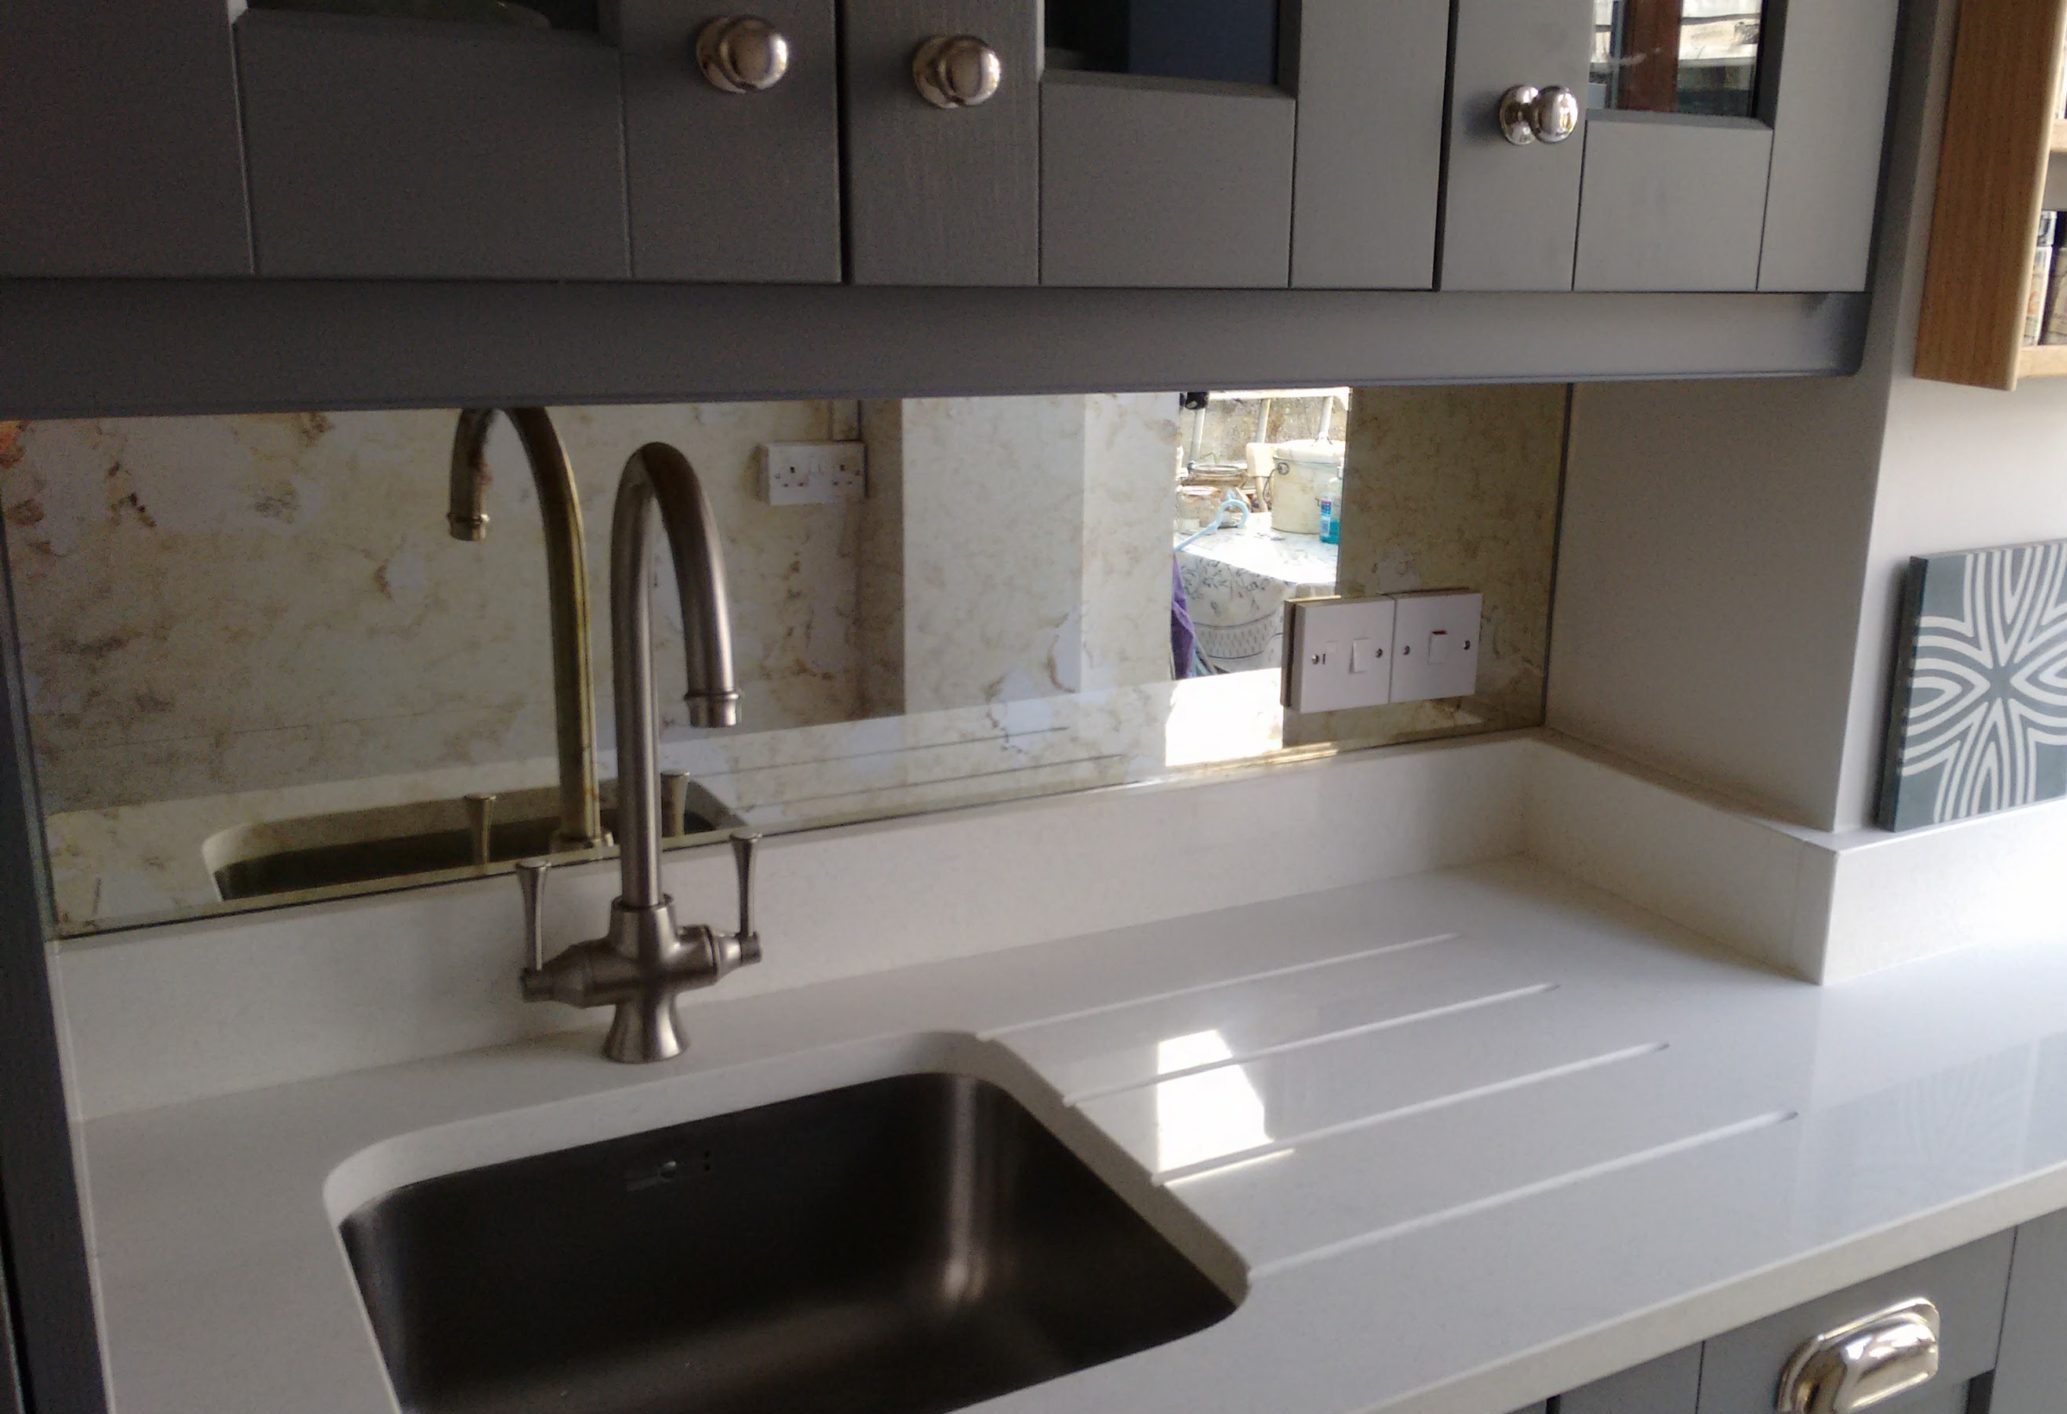 You are currently viewing Painted Kitchen with Antique Glass Splashback